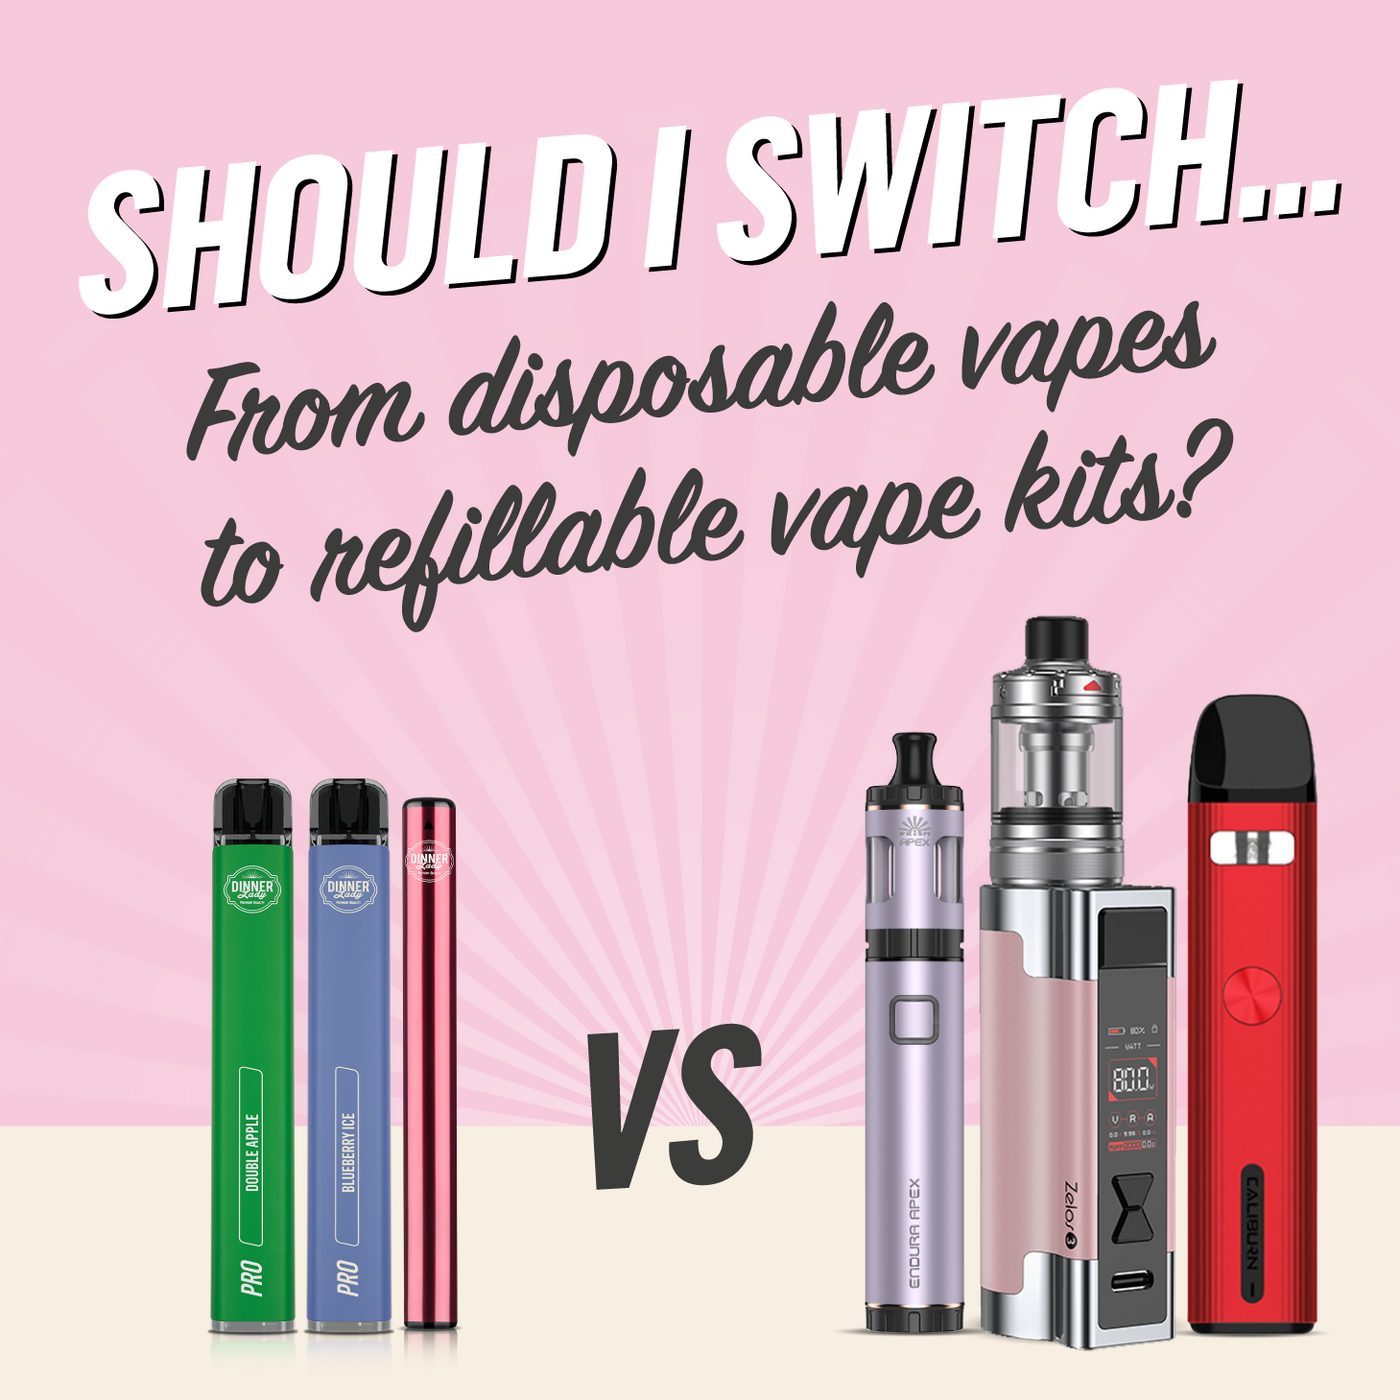 Should I switch from disposable vapes to refillable vape kits?